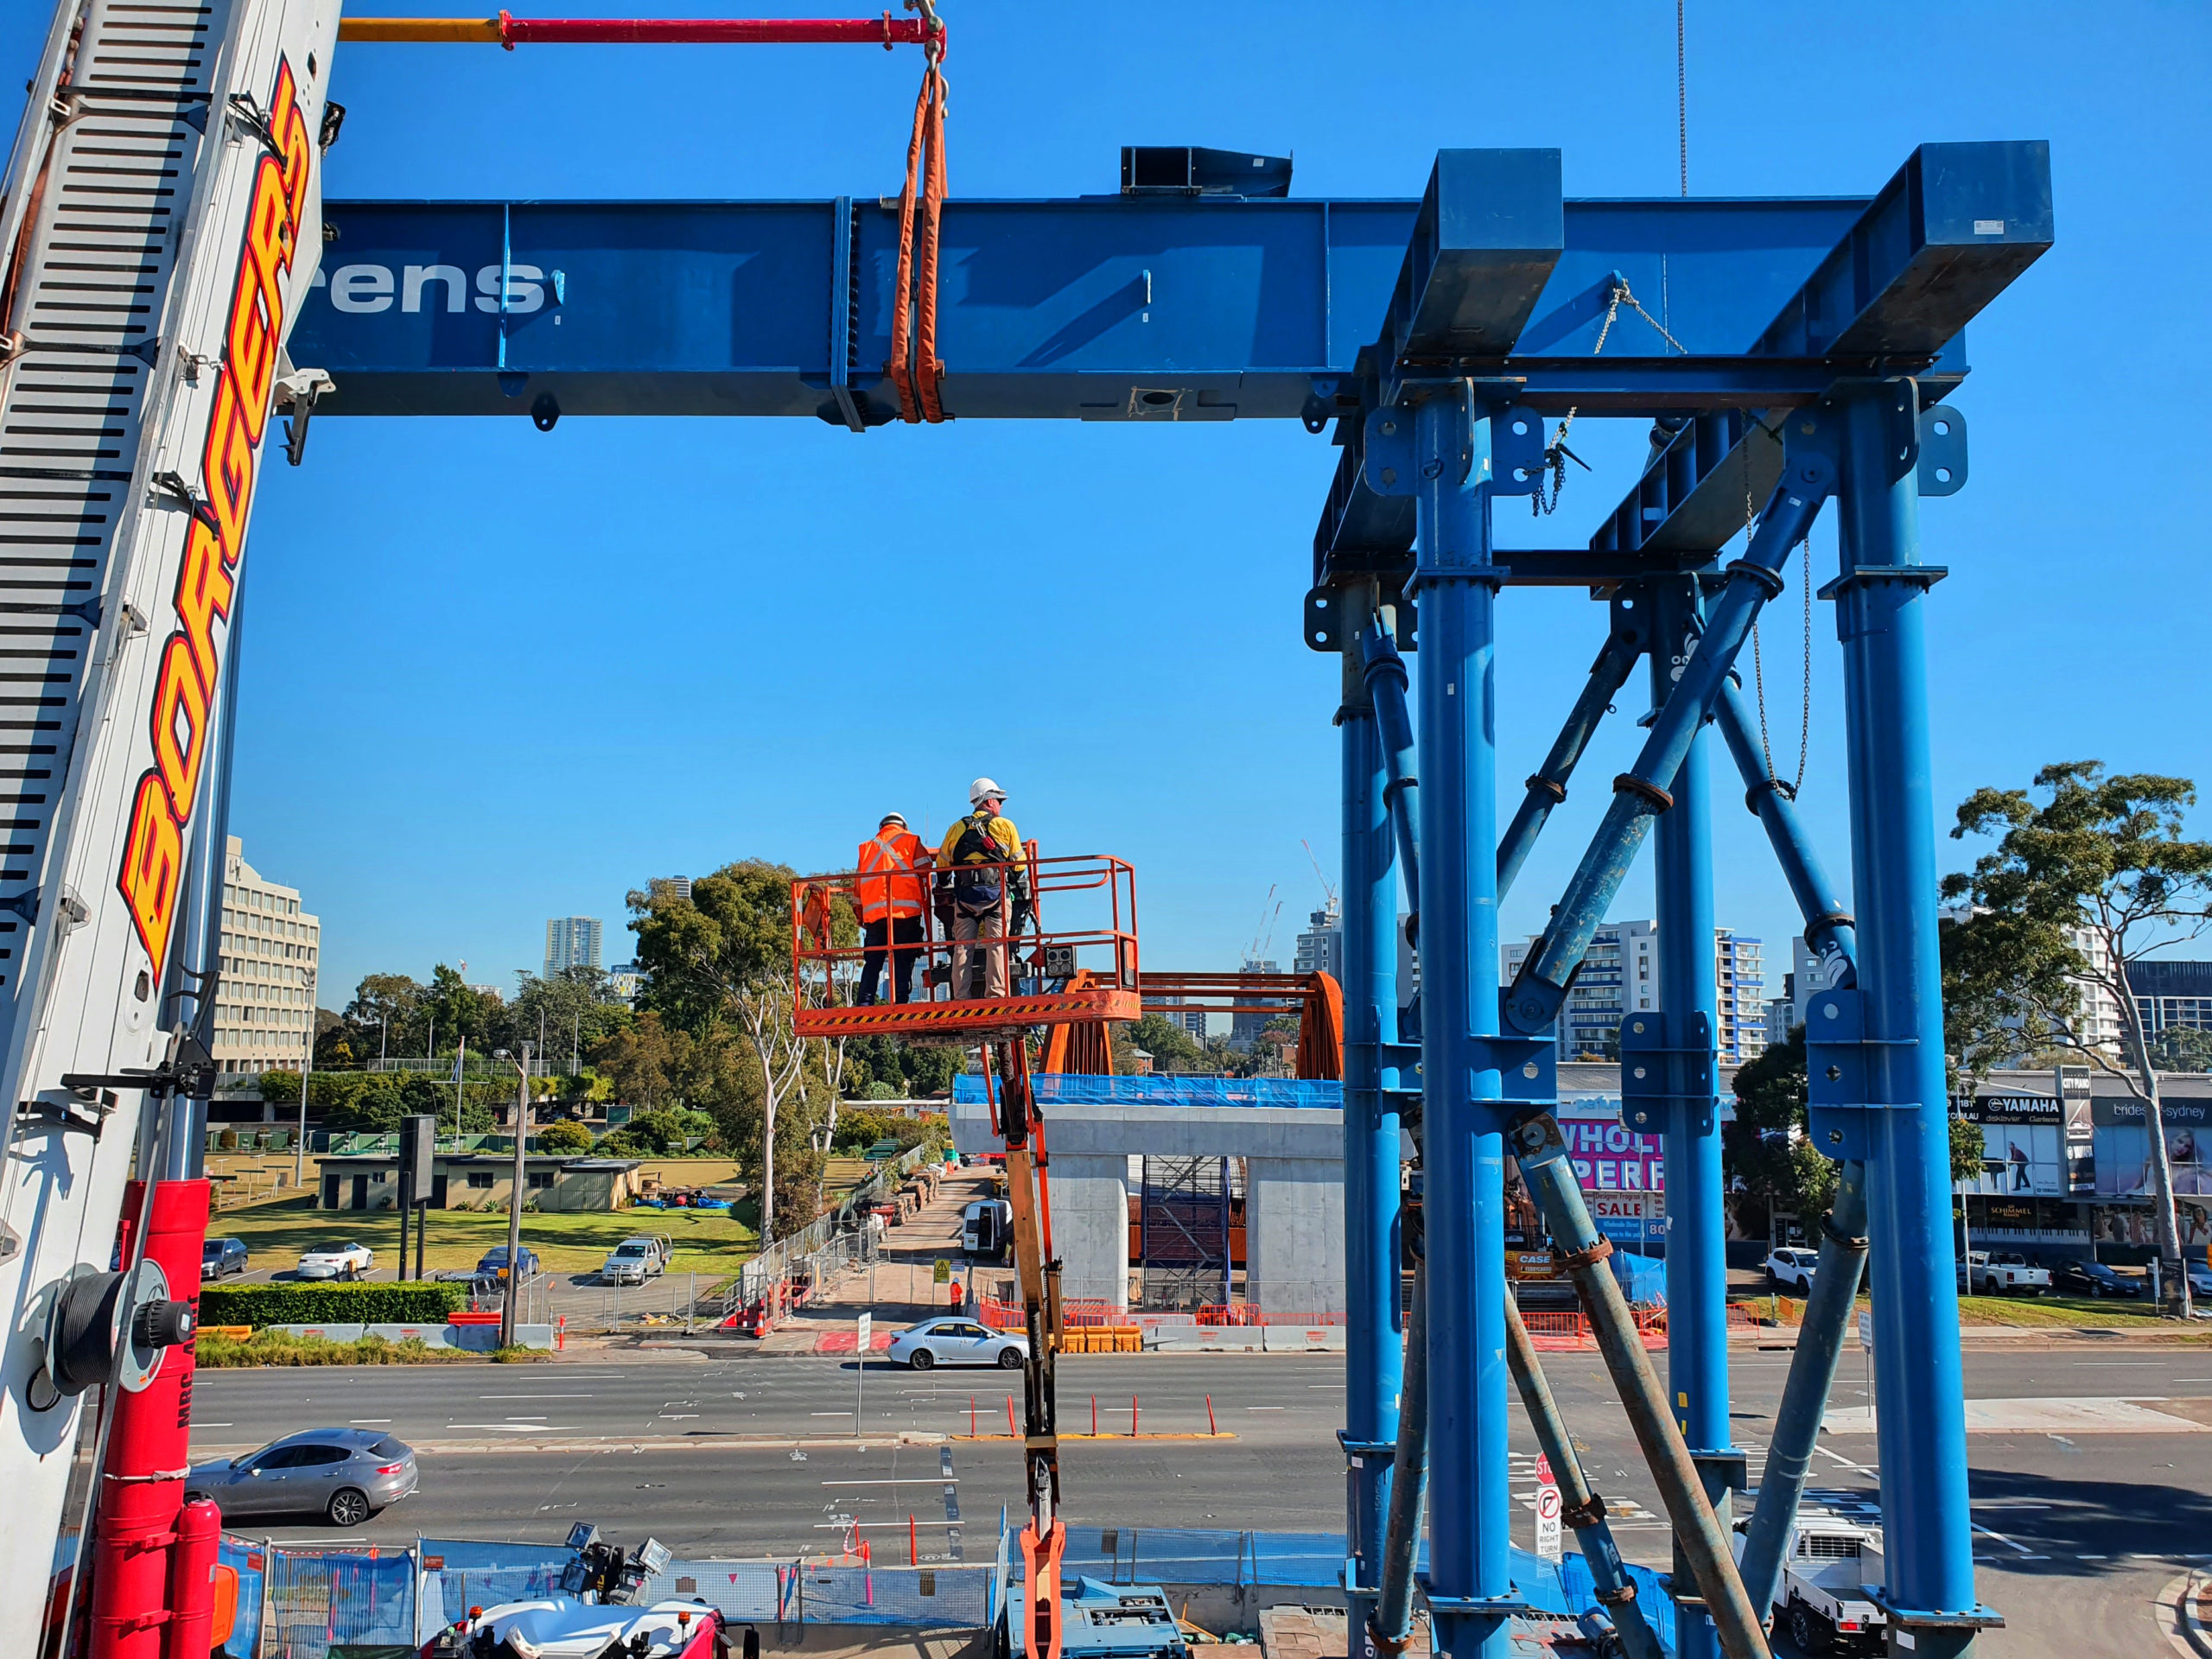 Temporary works coming together case civil and structural engineering project parramatta light rail